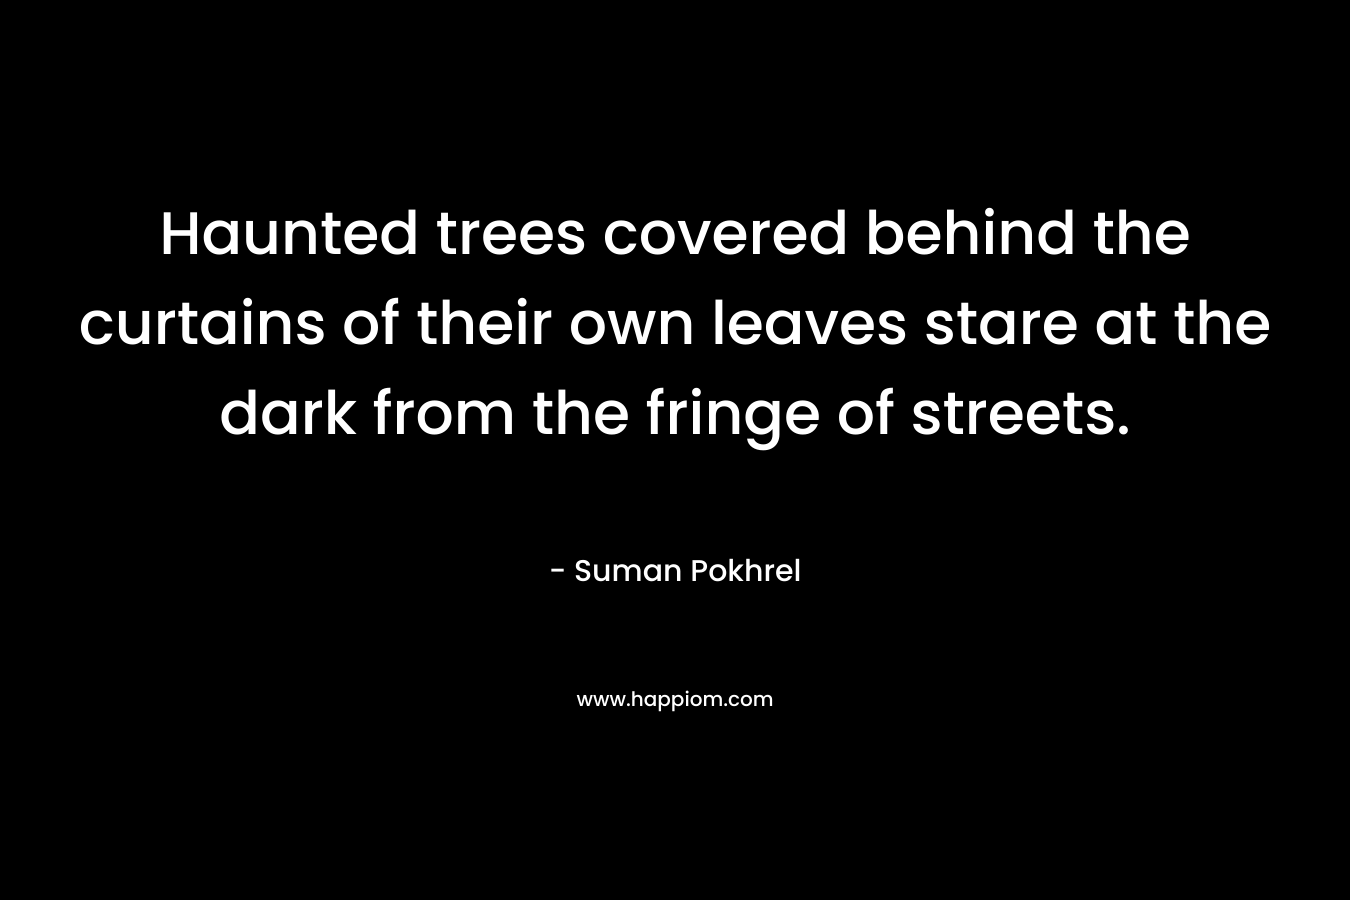 Haunted trees covered behind the curtains of their own leaves stare at the dark from the fringe of streets.